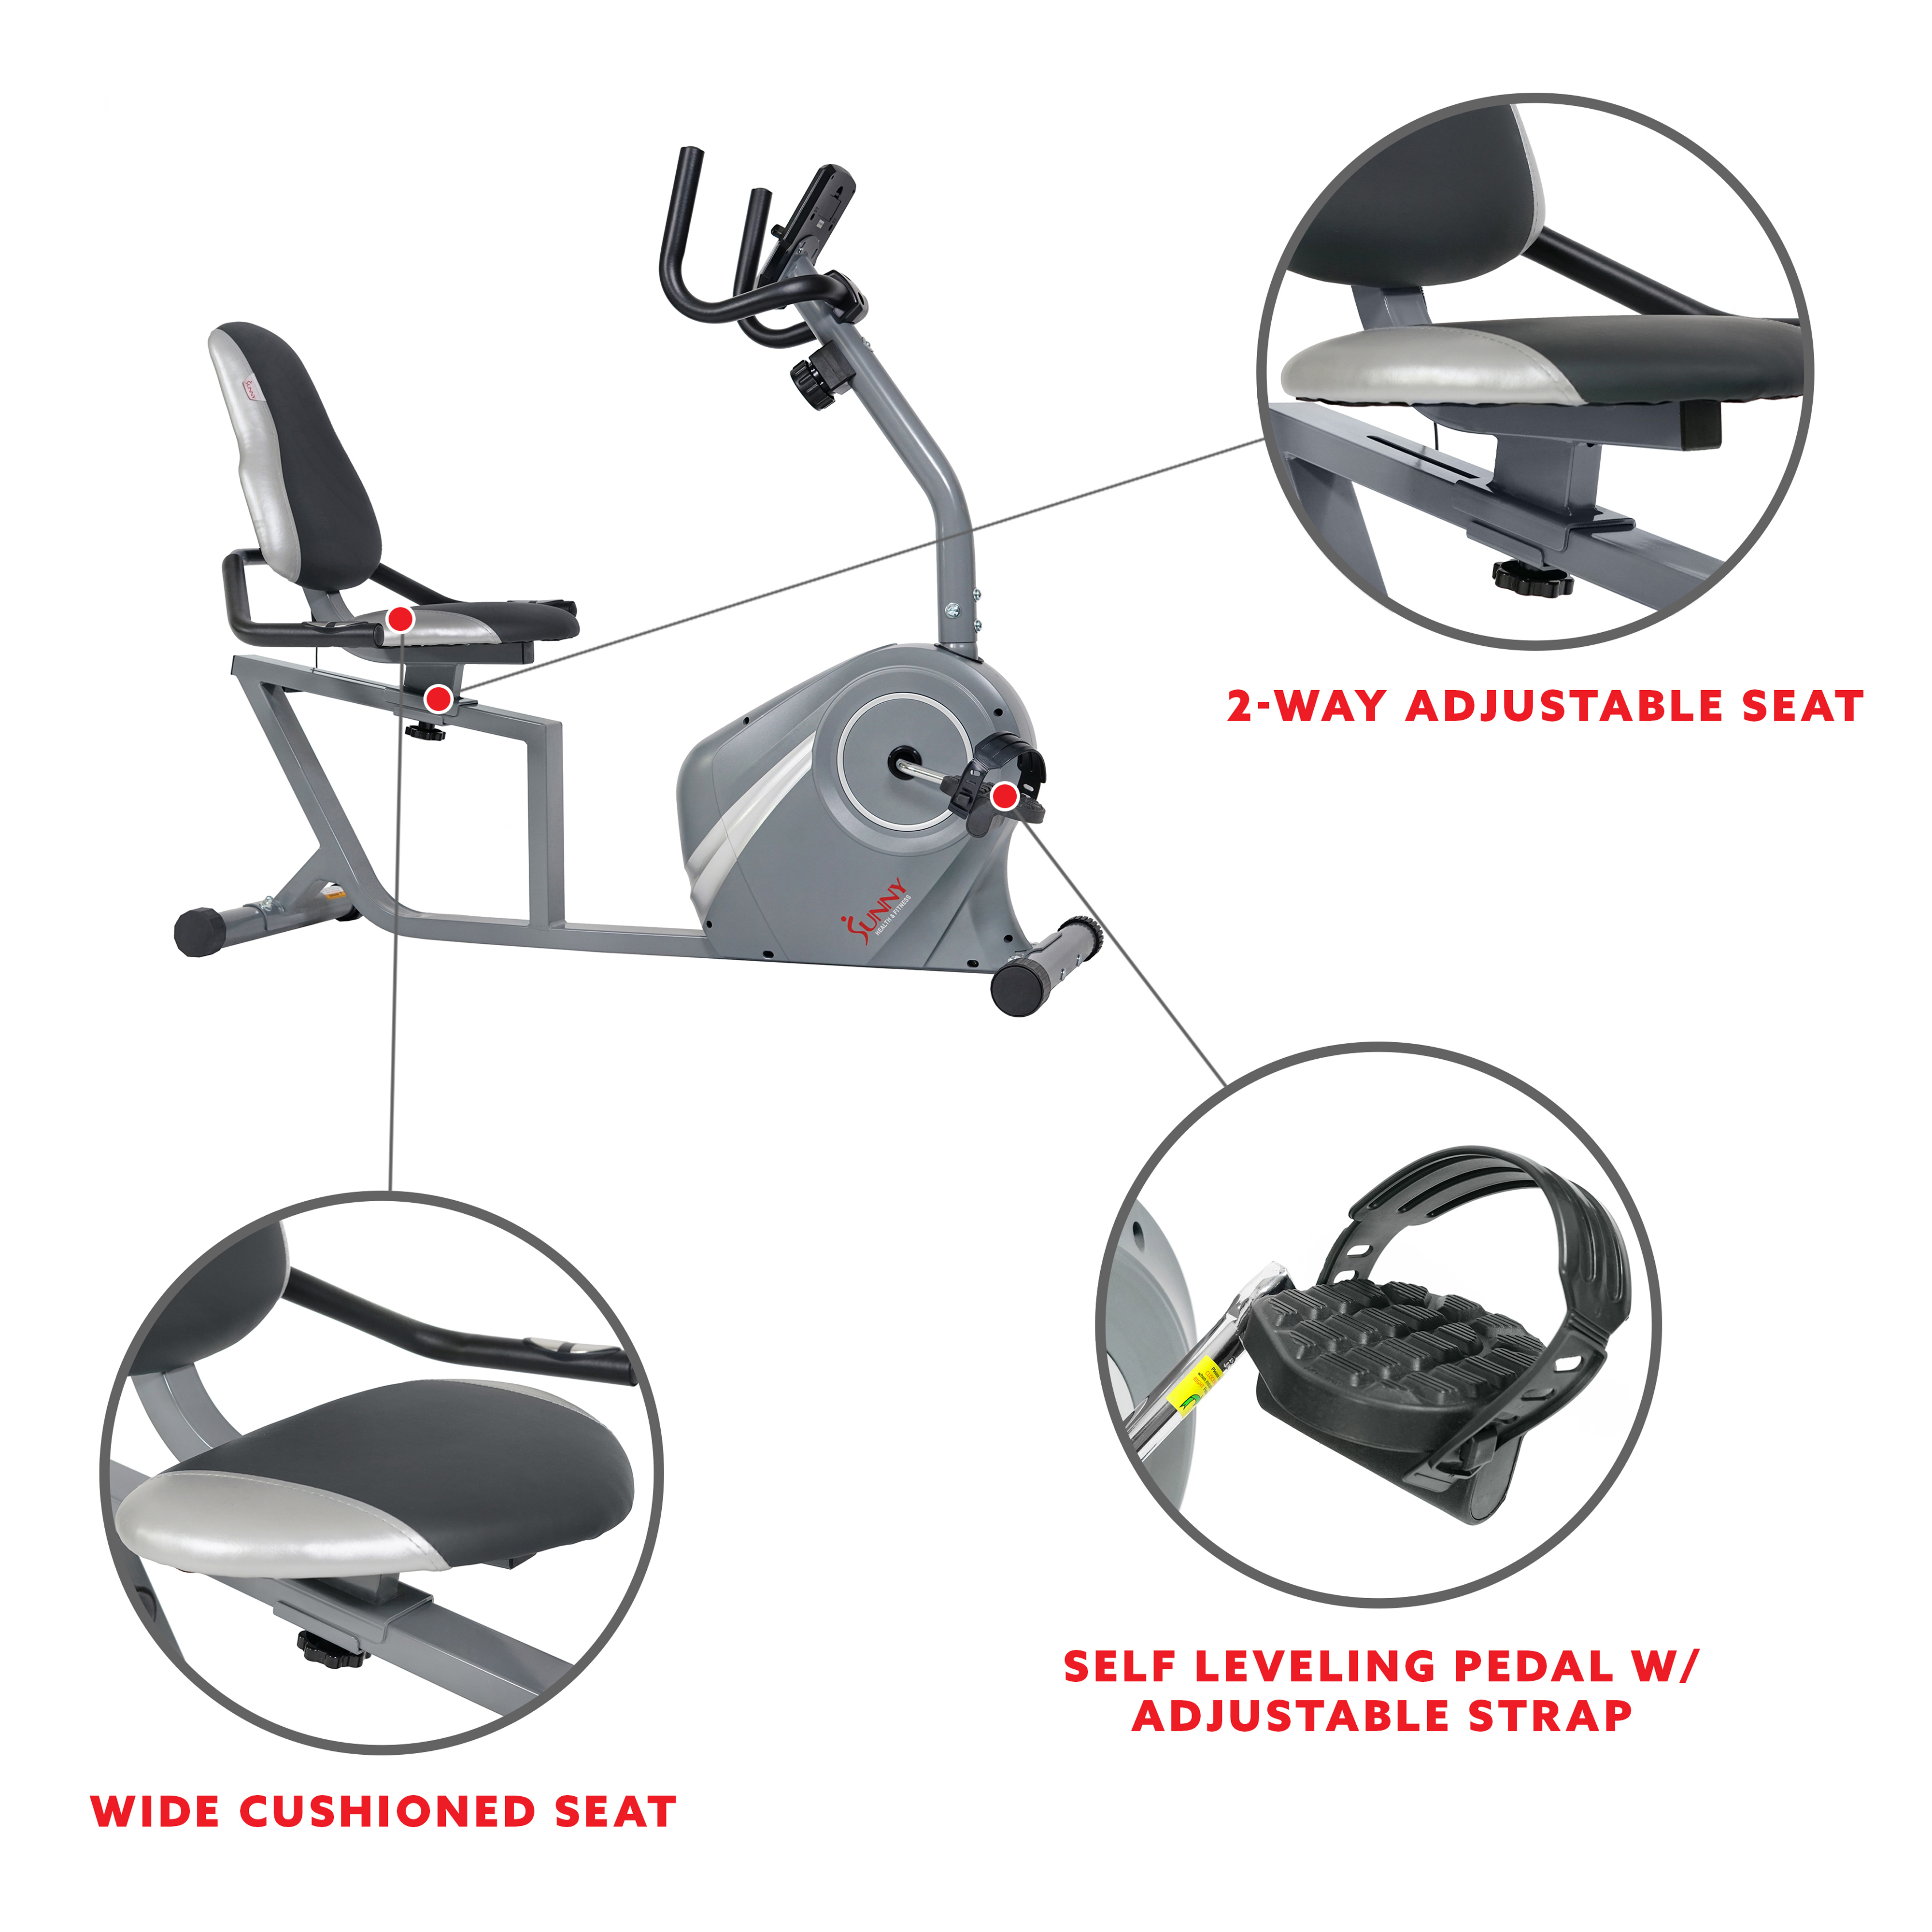 Sunny Health & Fitness Magnetic Recumbent Exercise Bike for Indoor Cardio Training w/ Adjustable Soft Seat Cushion, SF-RB4876 - image 5 of 8